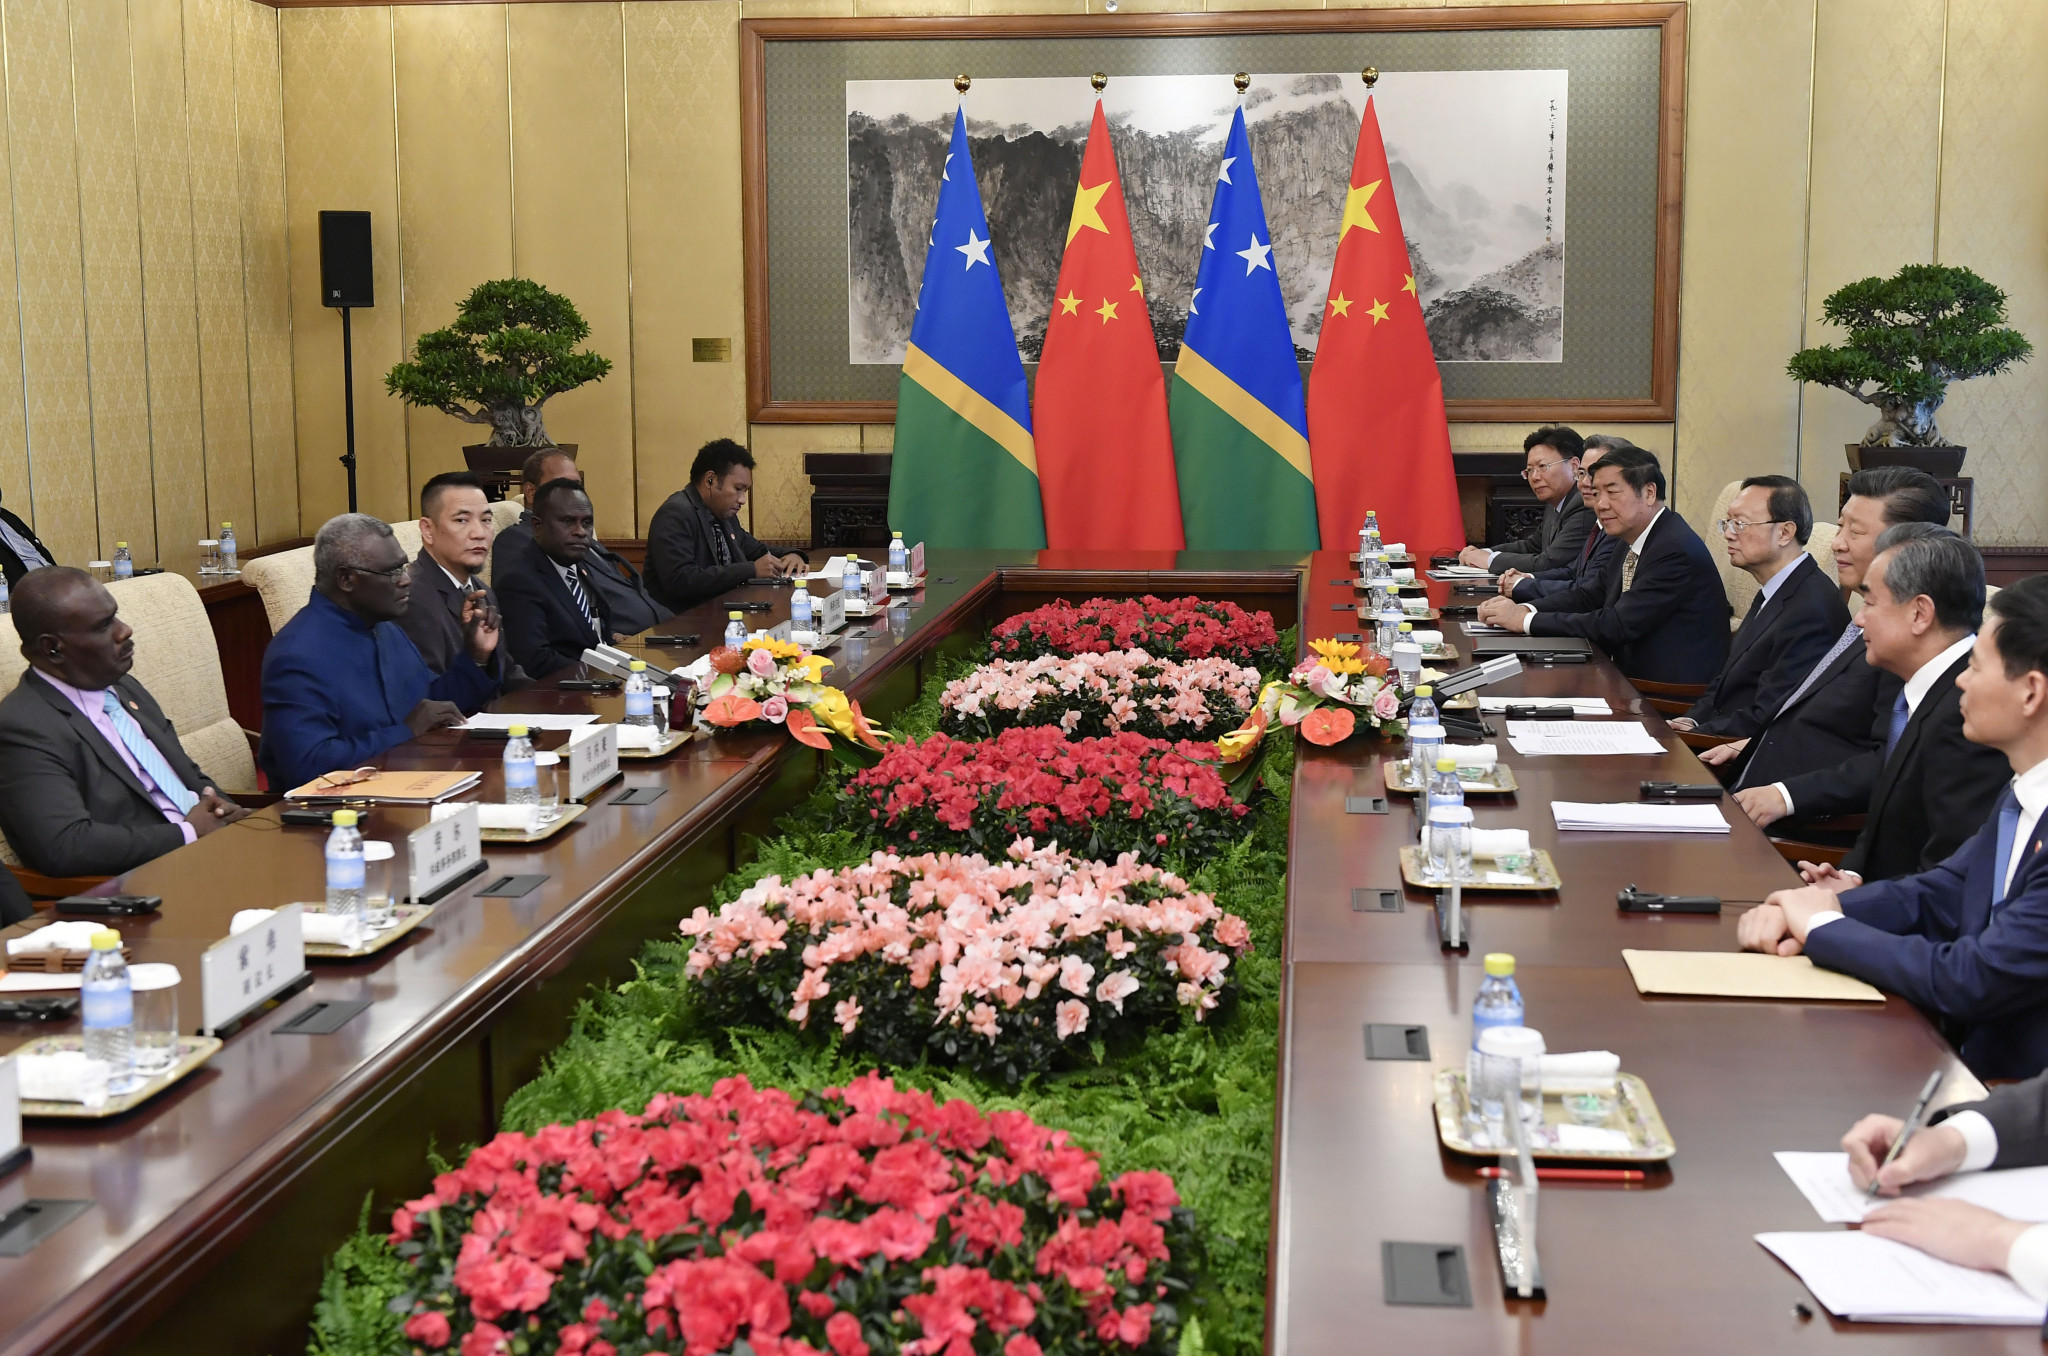 The Solomon Islands has strengthened ties with China since switching diplomatic recognition from Taiwan to Beijing in 2019 under Prime Minister Manasseh Sogavare ©Getty Images